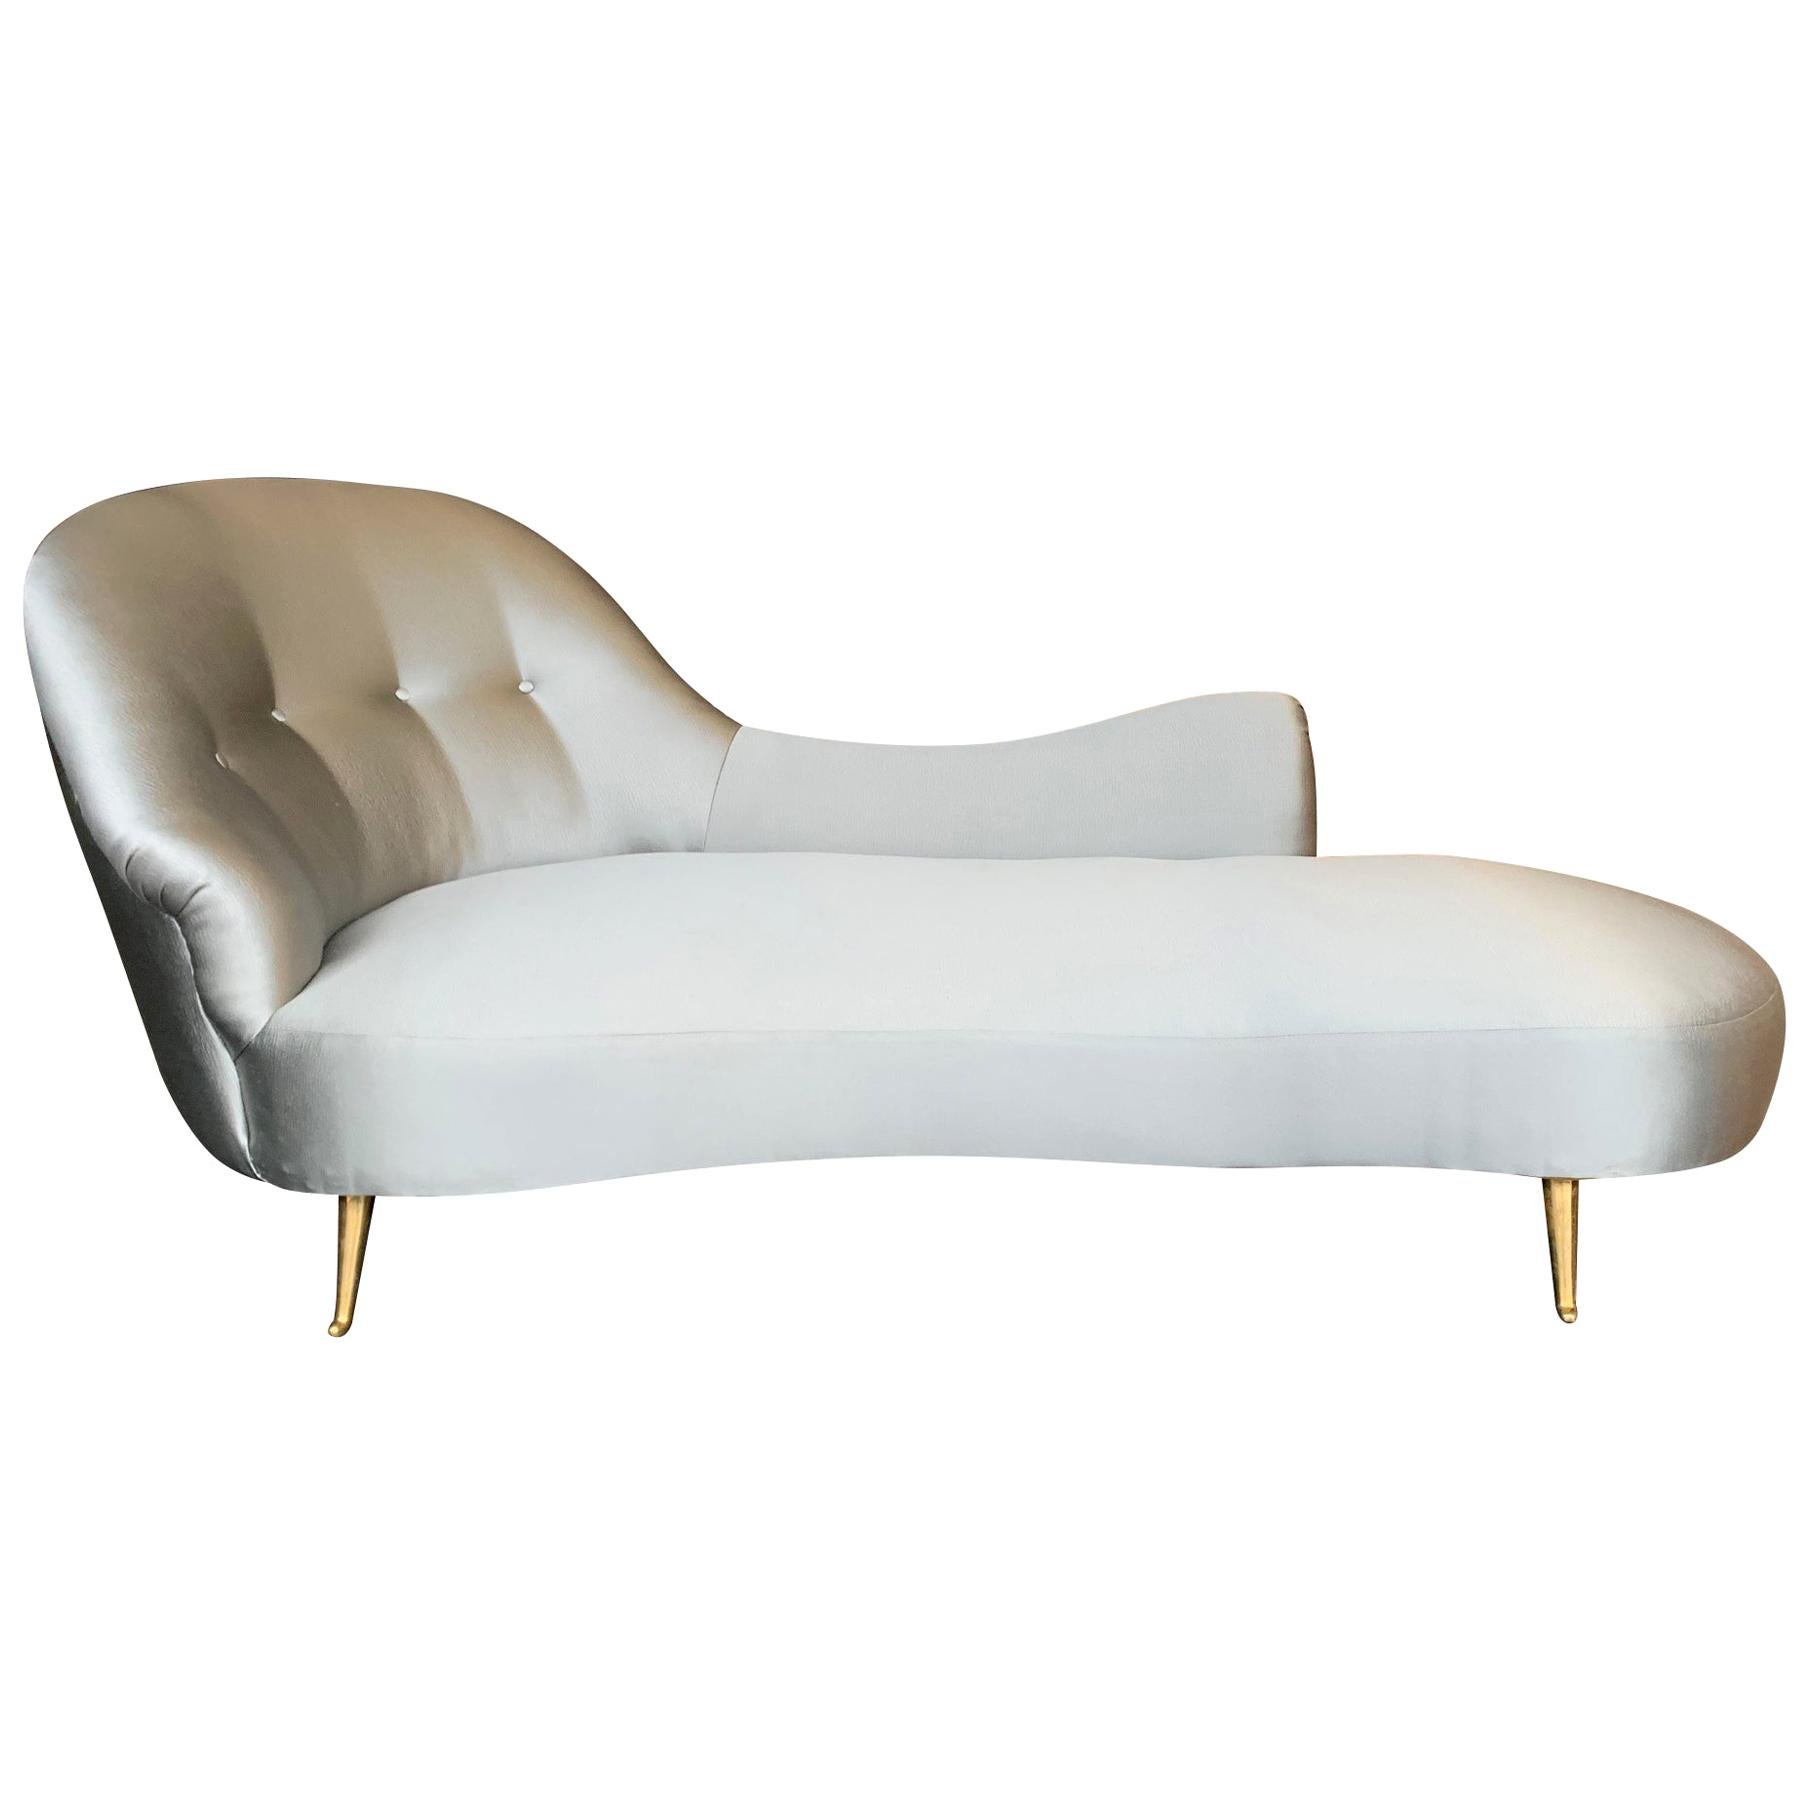 Italian Chaise Longue Upholstered in Champagne Grey Fabric with Brass Feet